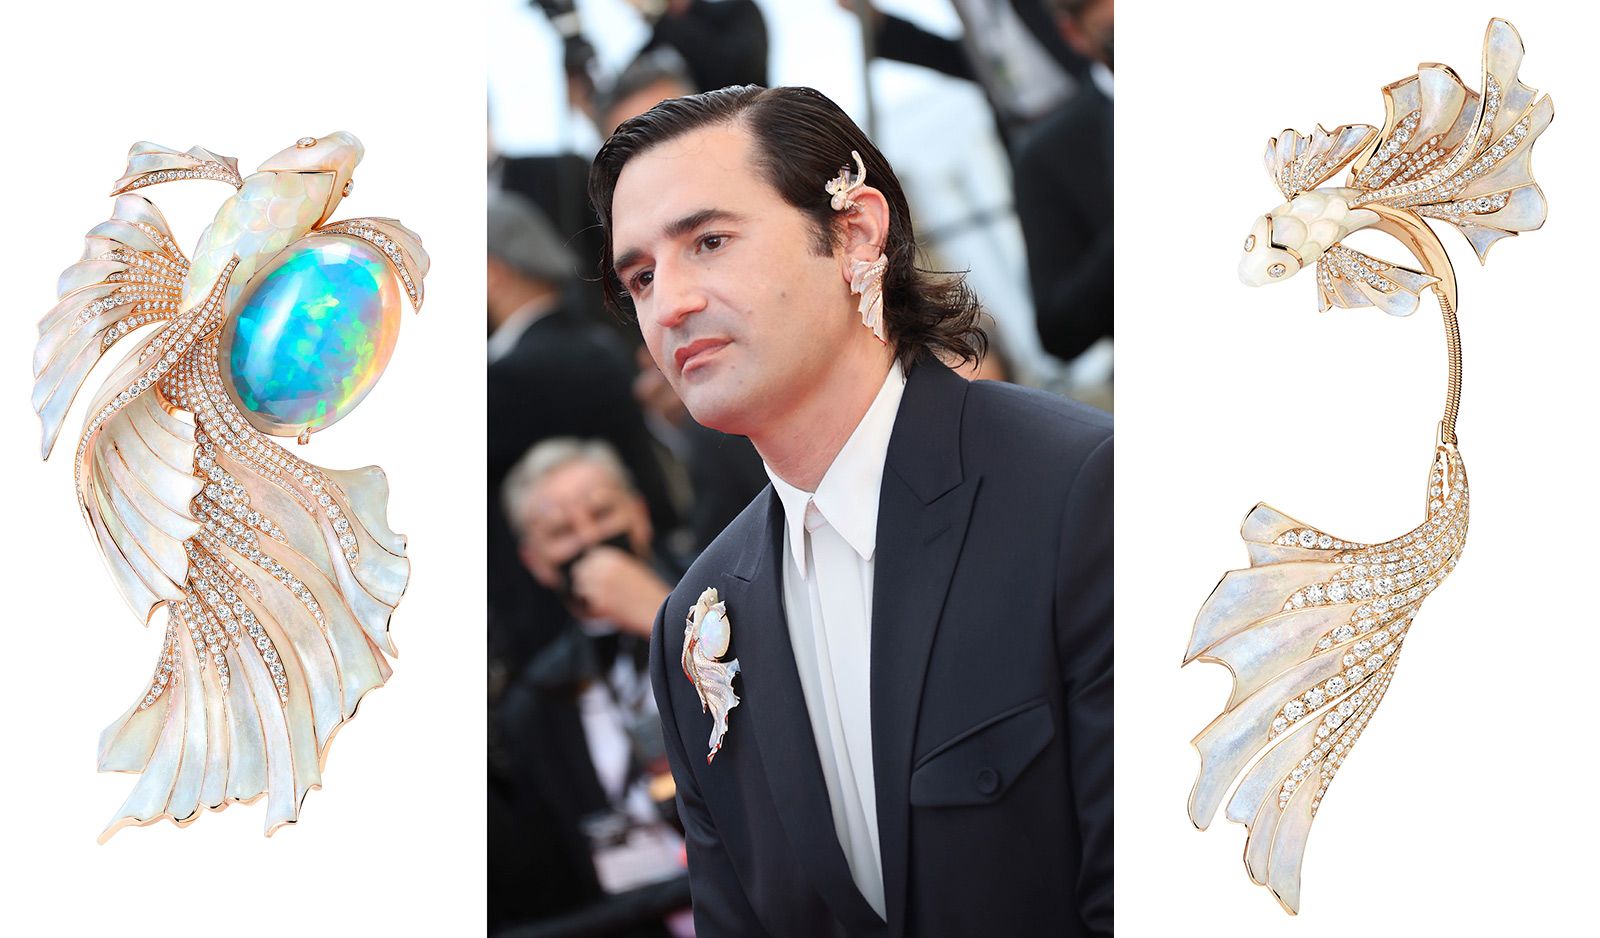 Nicolas Maury impressed with the Boucheron Opalescence brooch, set with a 71.69 carat oval cabochon white opal from Ethiopia, and the Opalescence pendant earring set with opals and diamonds from the Carte Blanche, Holographique High Jewelry collection